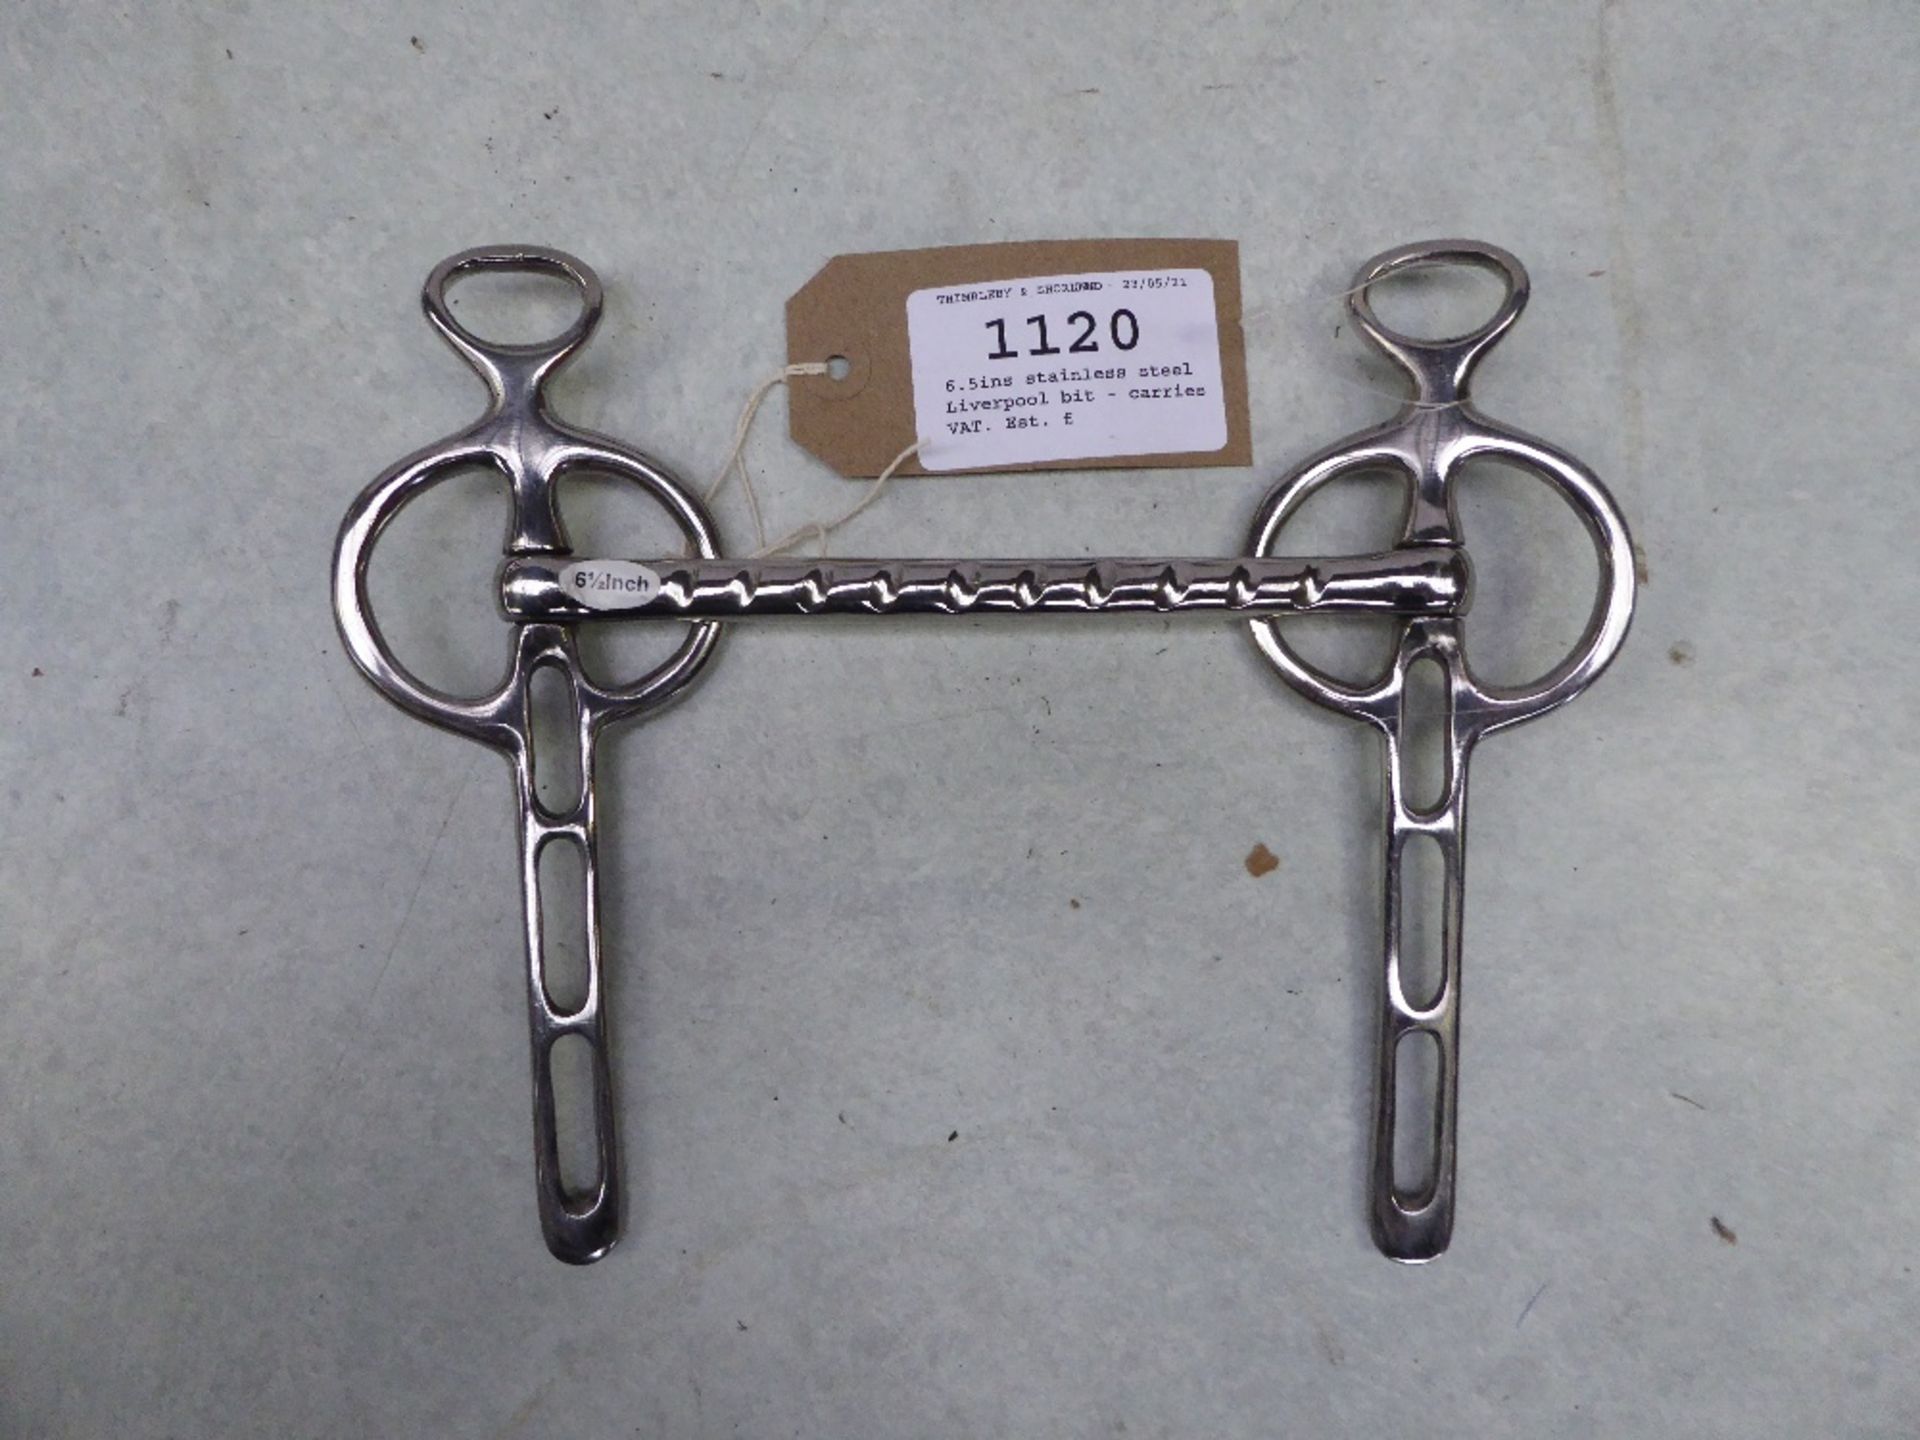 6.5ins stainless steel Liverpool bit - carries VAT.